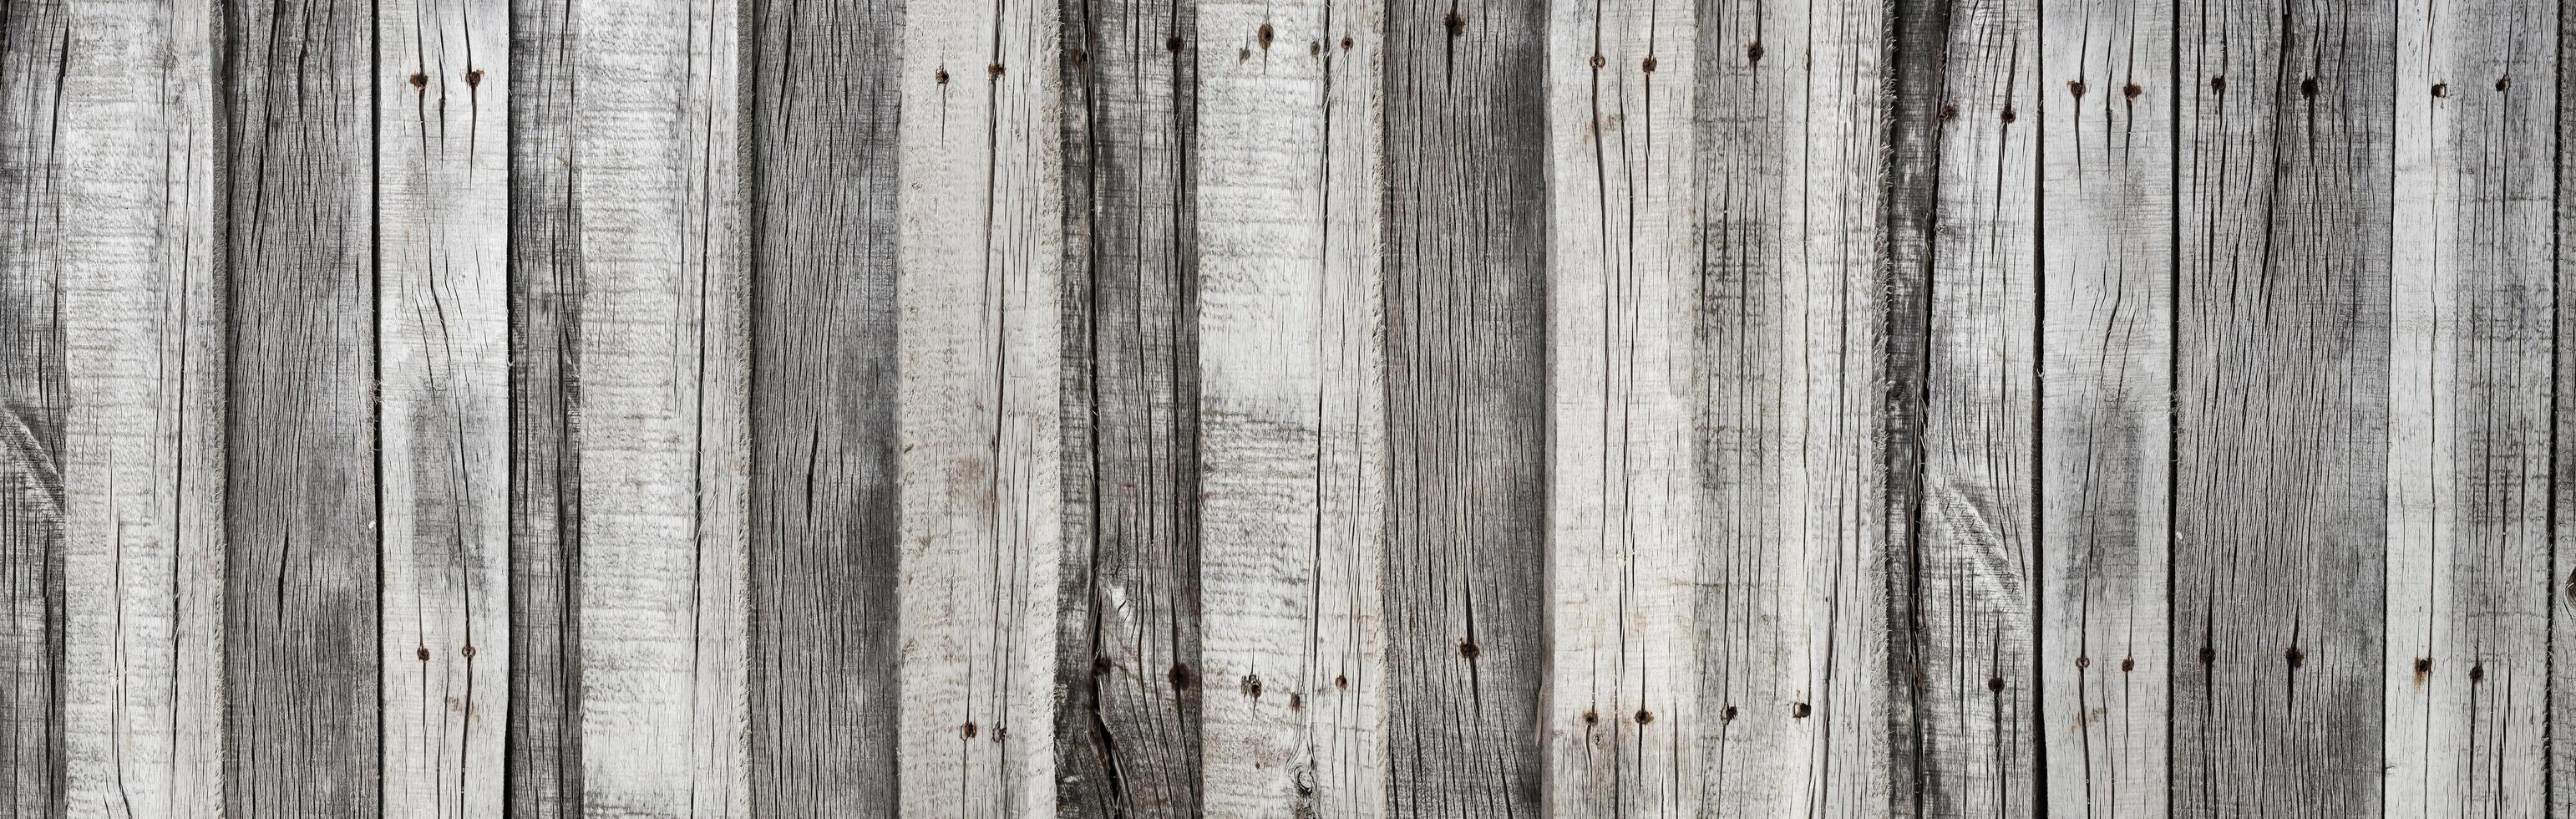 Wooden rustic grey planks texture vertical background photo